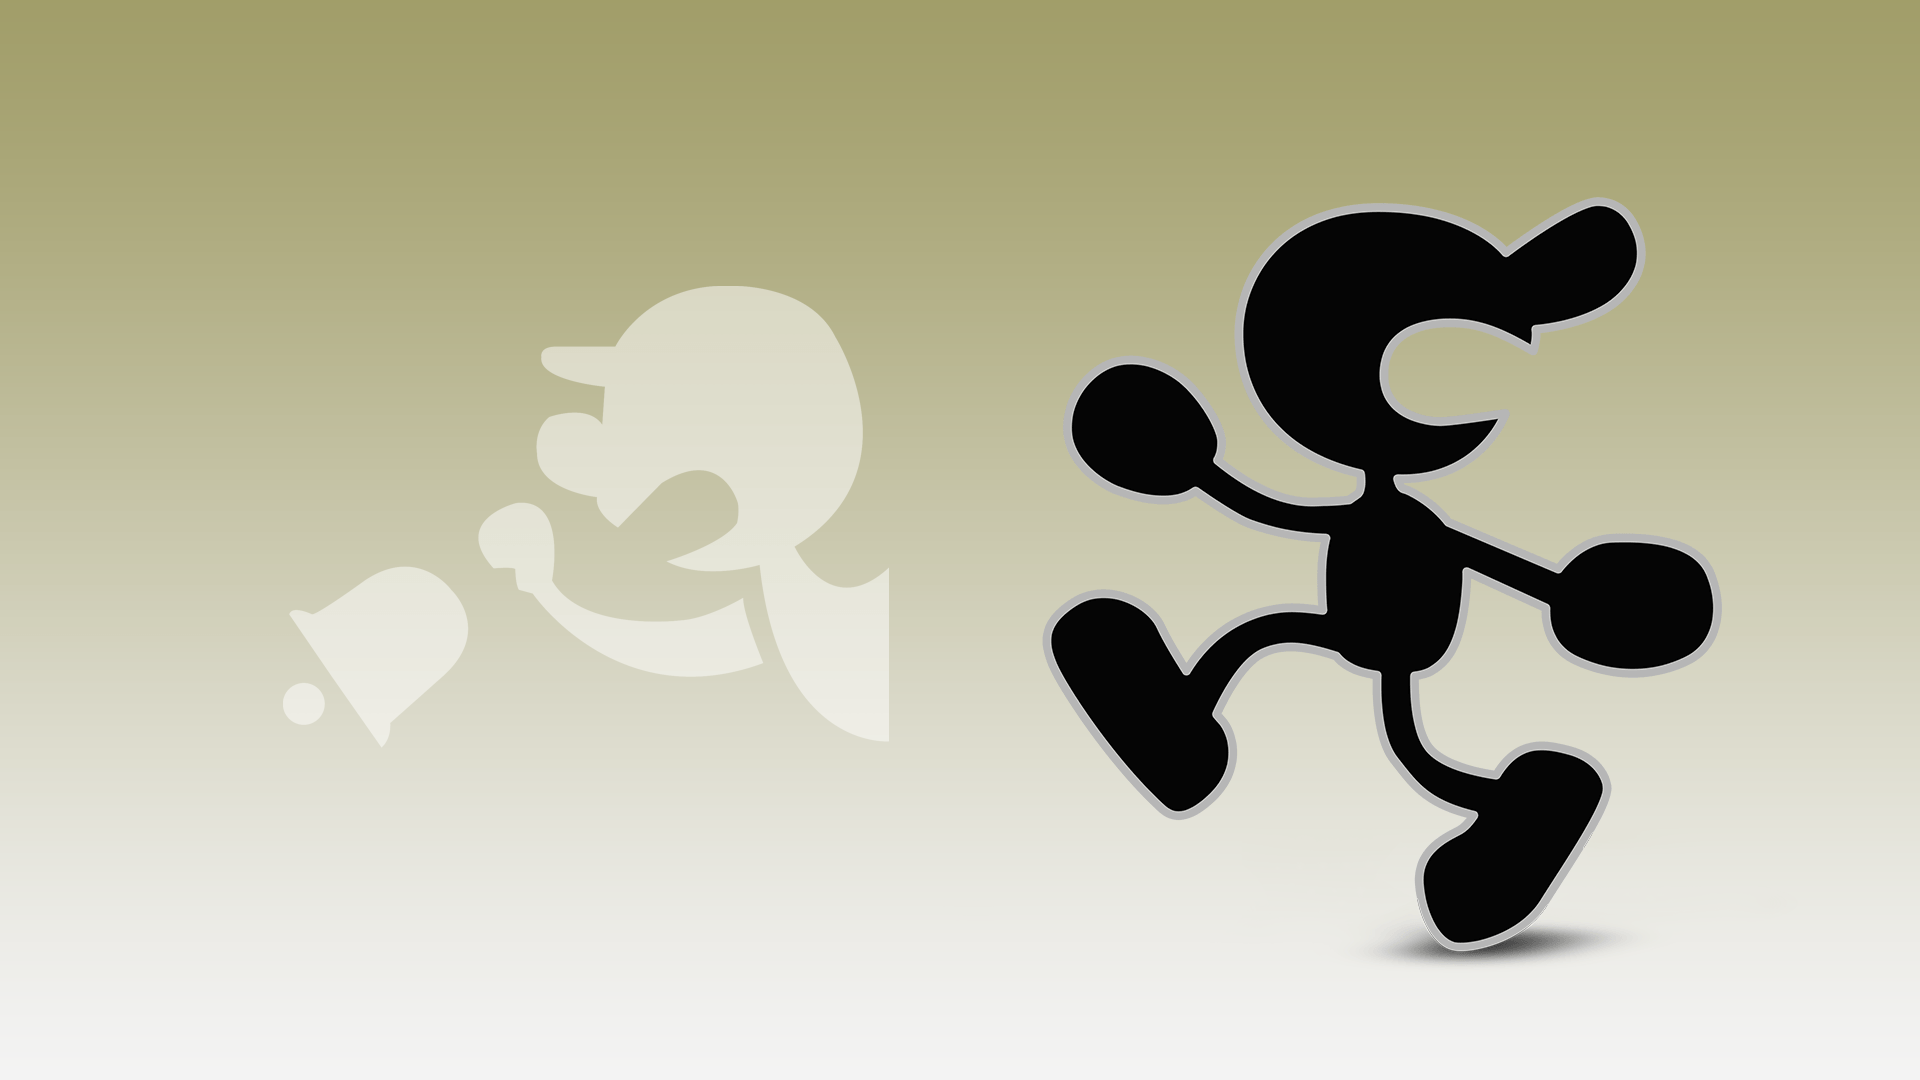 Mr Game and Watch Wallpaper. Overwatch